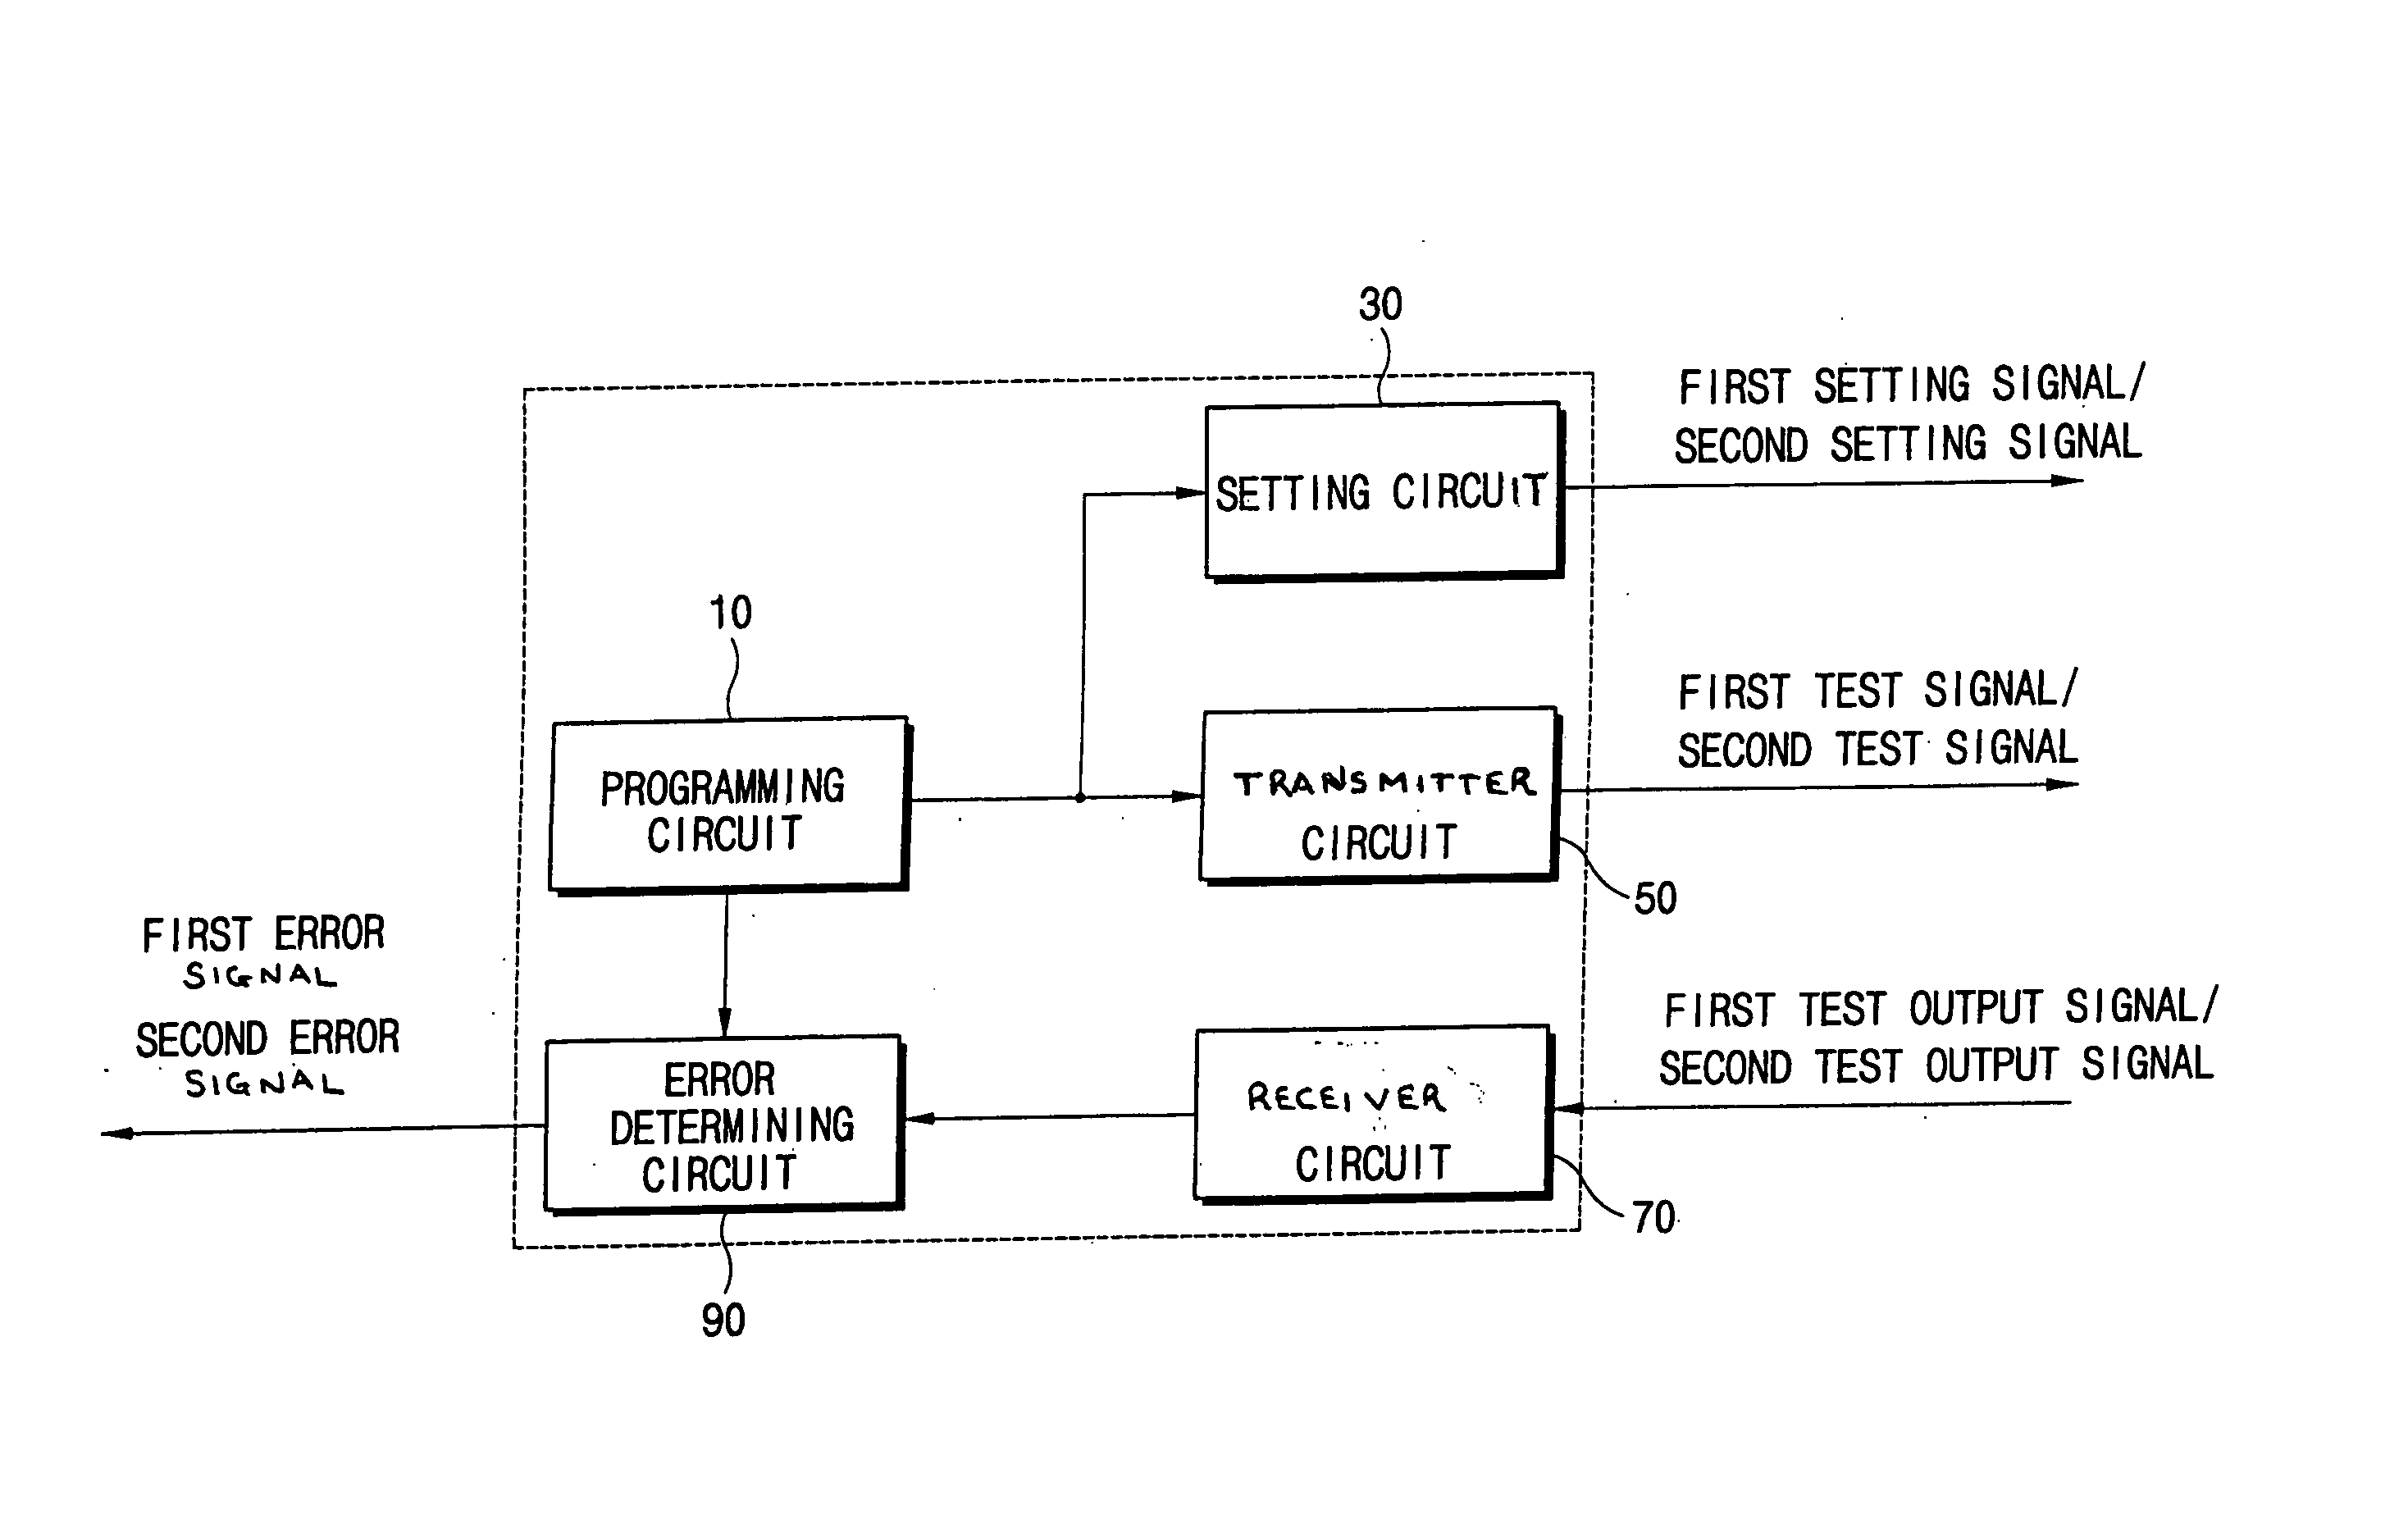 Method and apparatus for testing semiconductor memory device and related testing methods